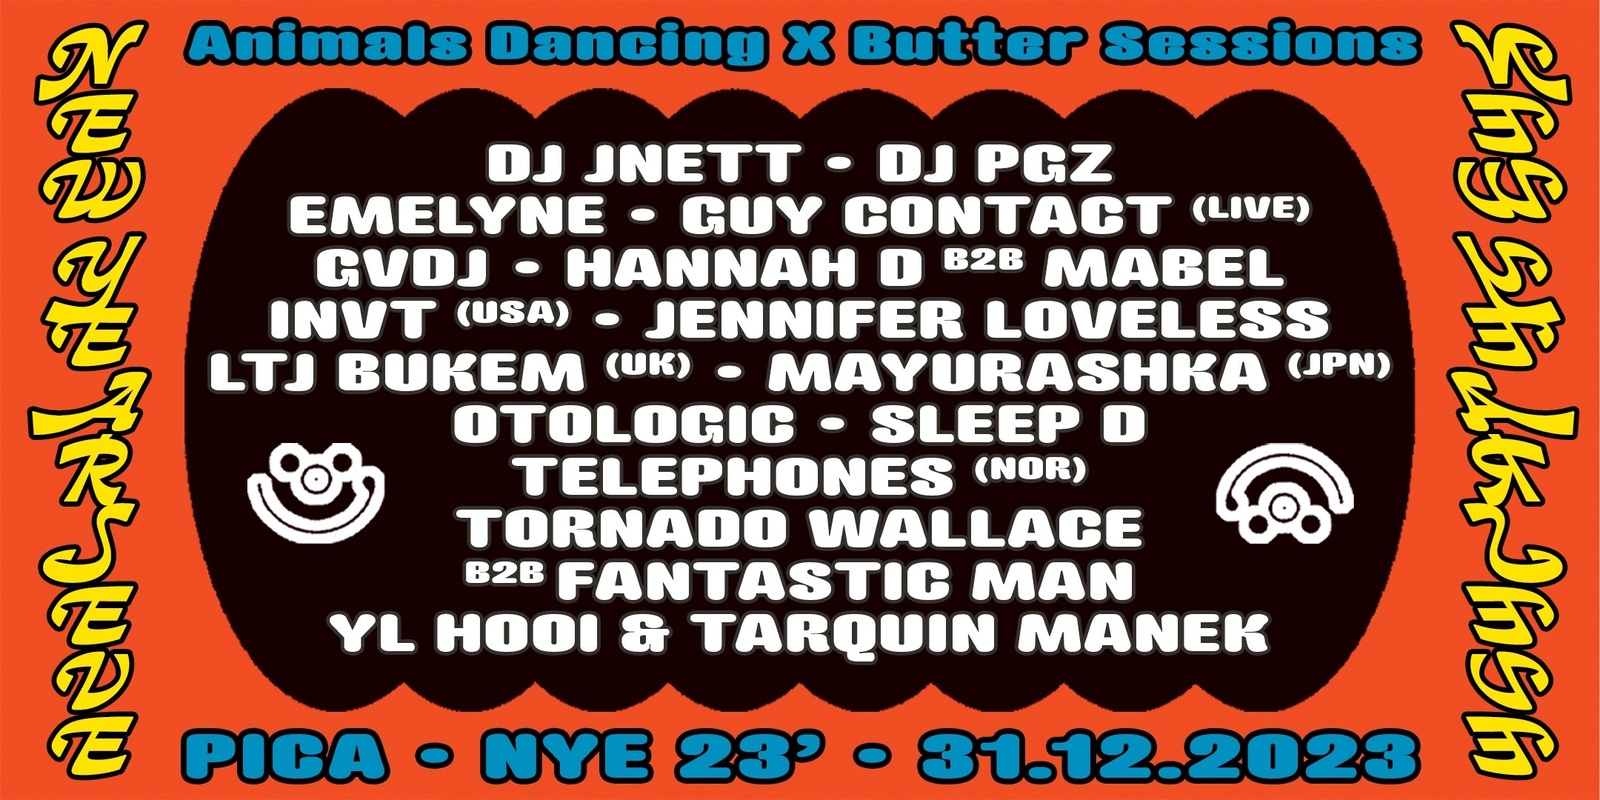 Banner image for Animals Dancing X Butter Sessions: New Year's Eve 2023